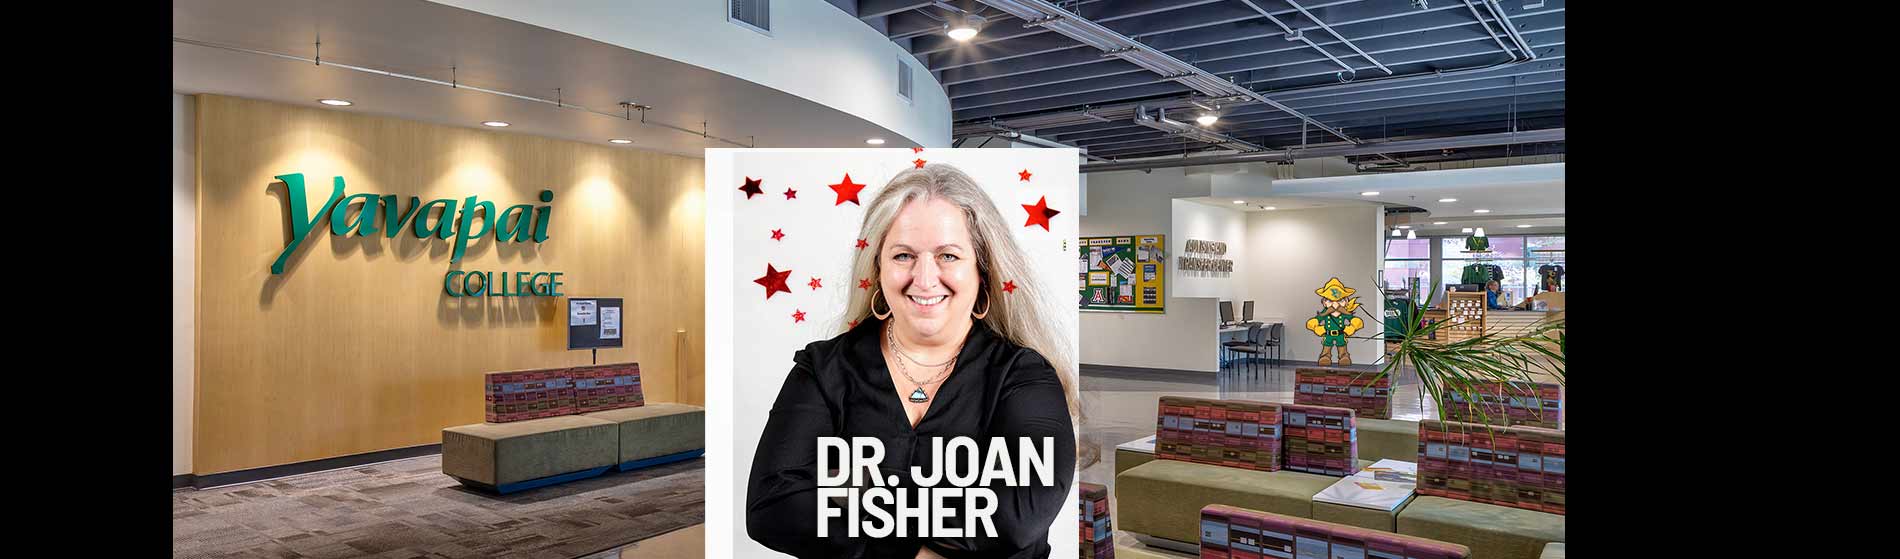 Dr Joan Fisher